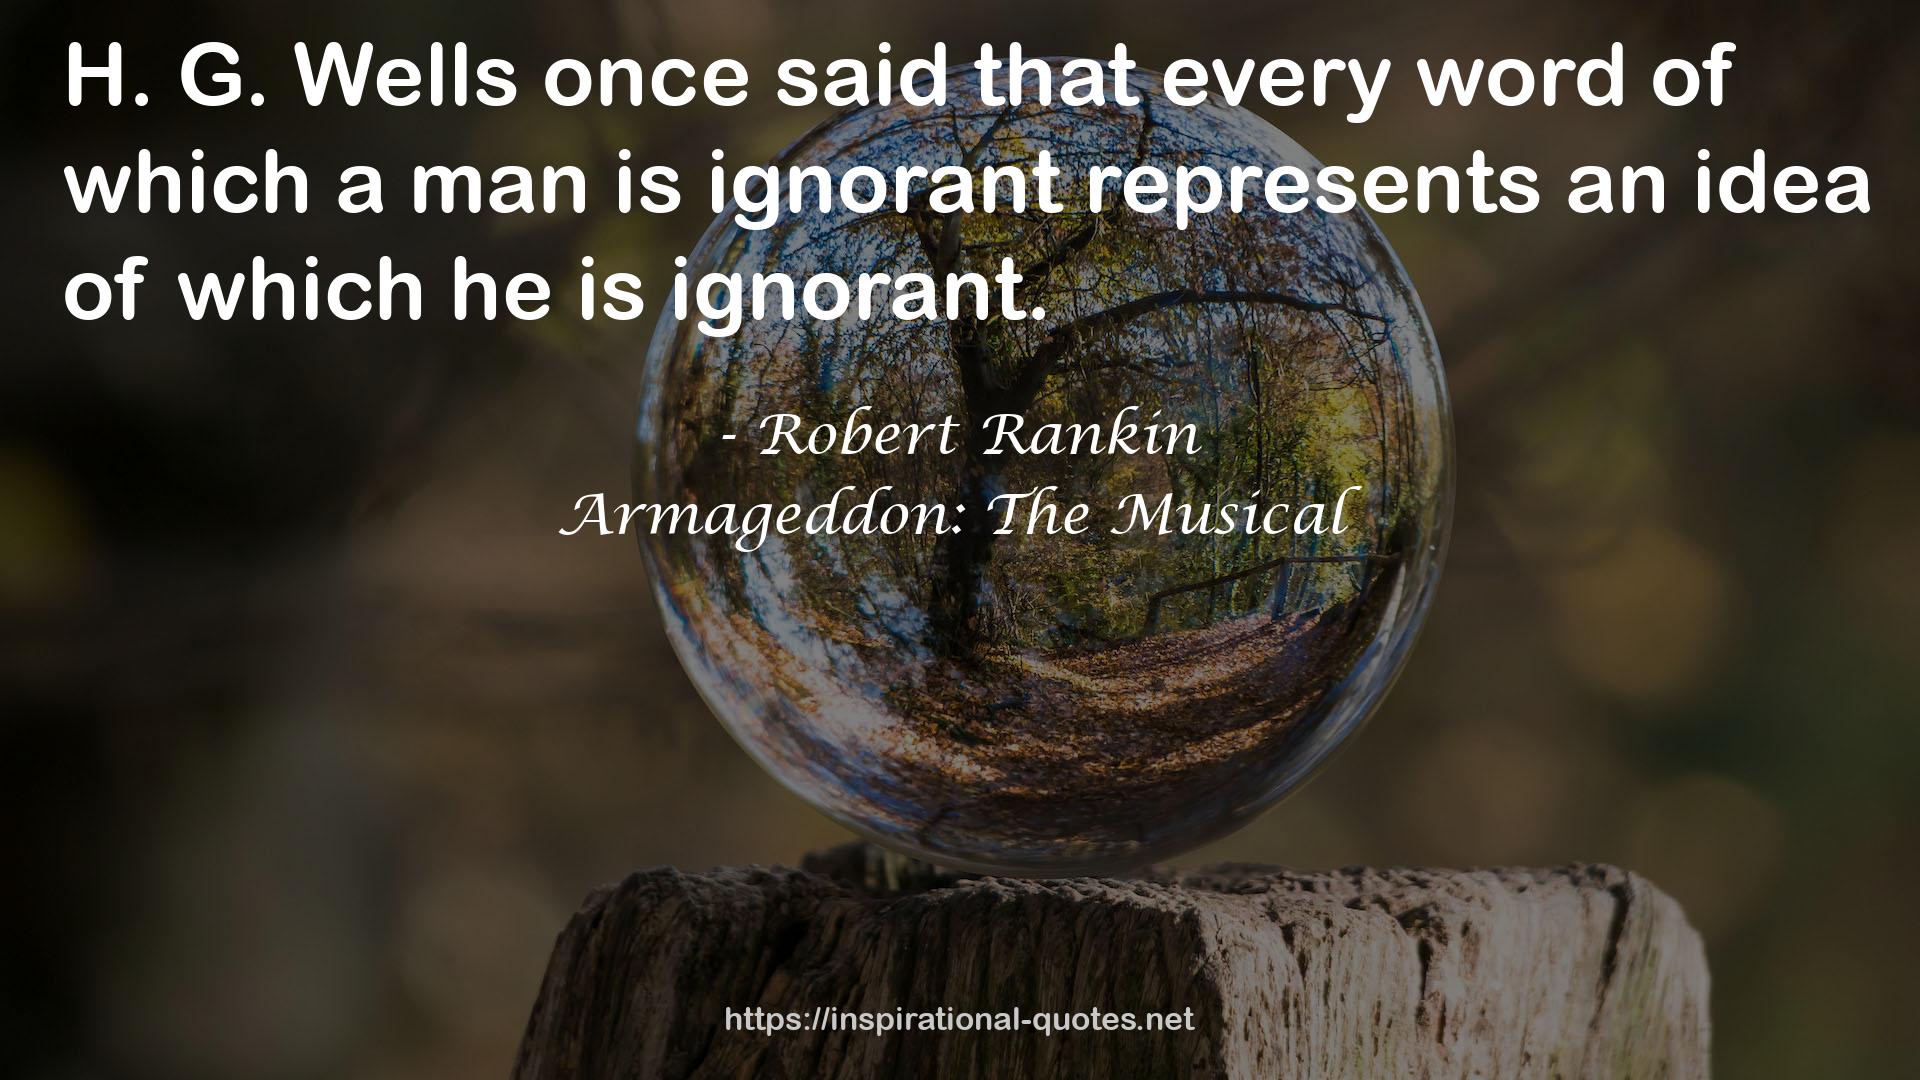 Armageddon: The Musical QUOTES